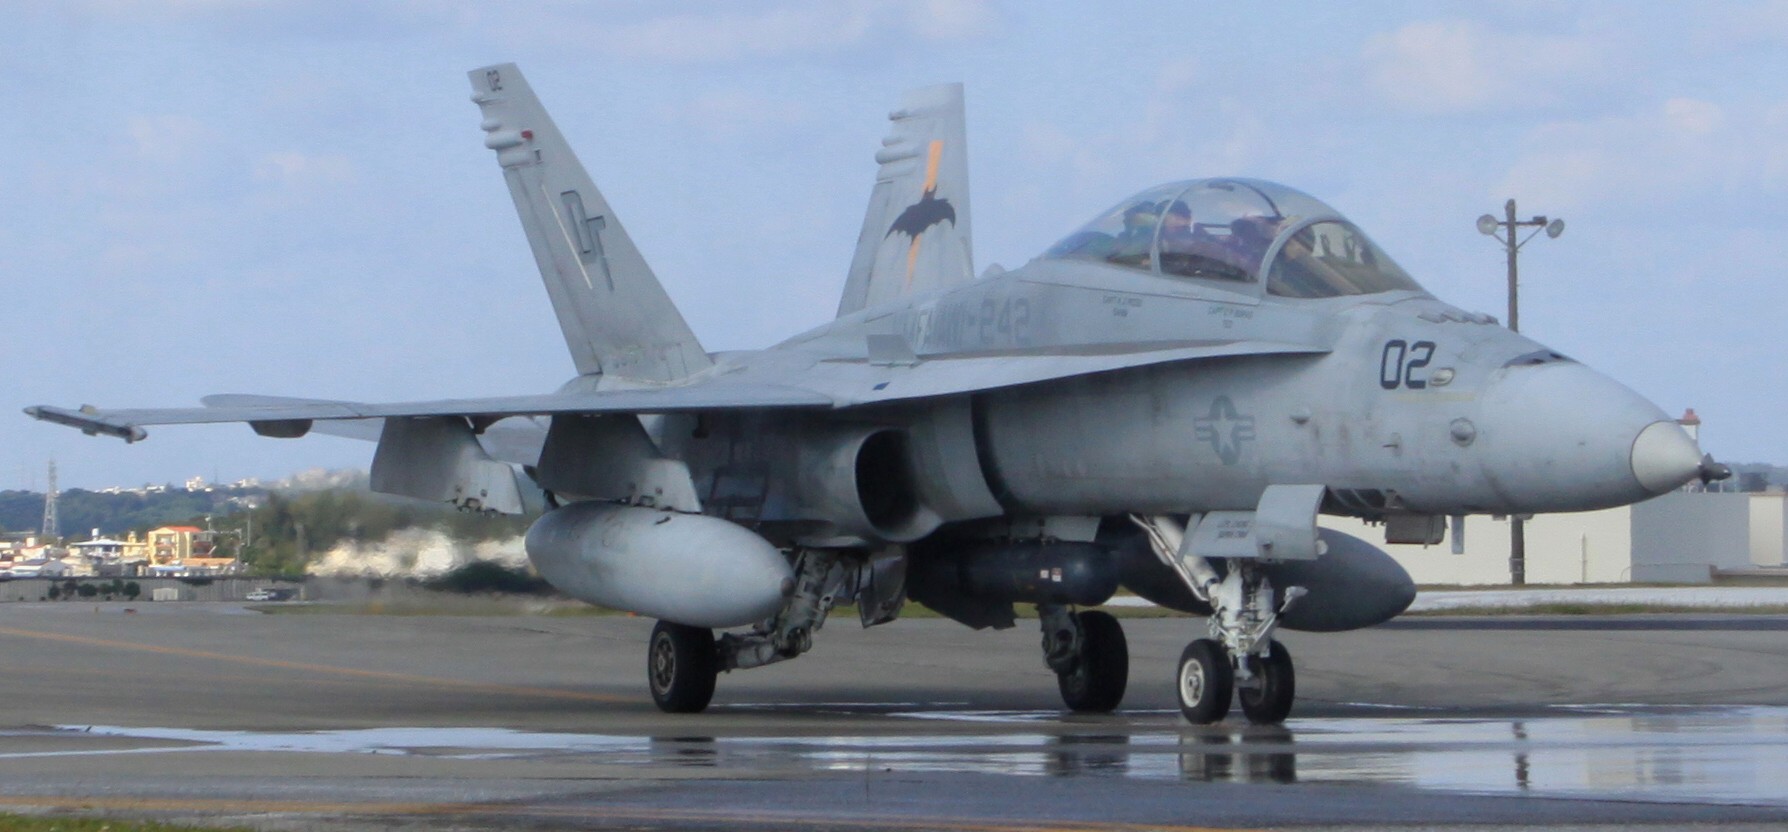 vmfa(aw)-242 bats marine all-weather fighter attack squadron usmc f/a-18d hornet 13